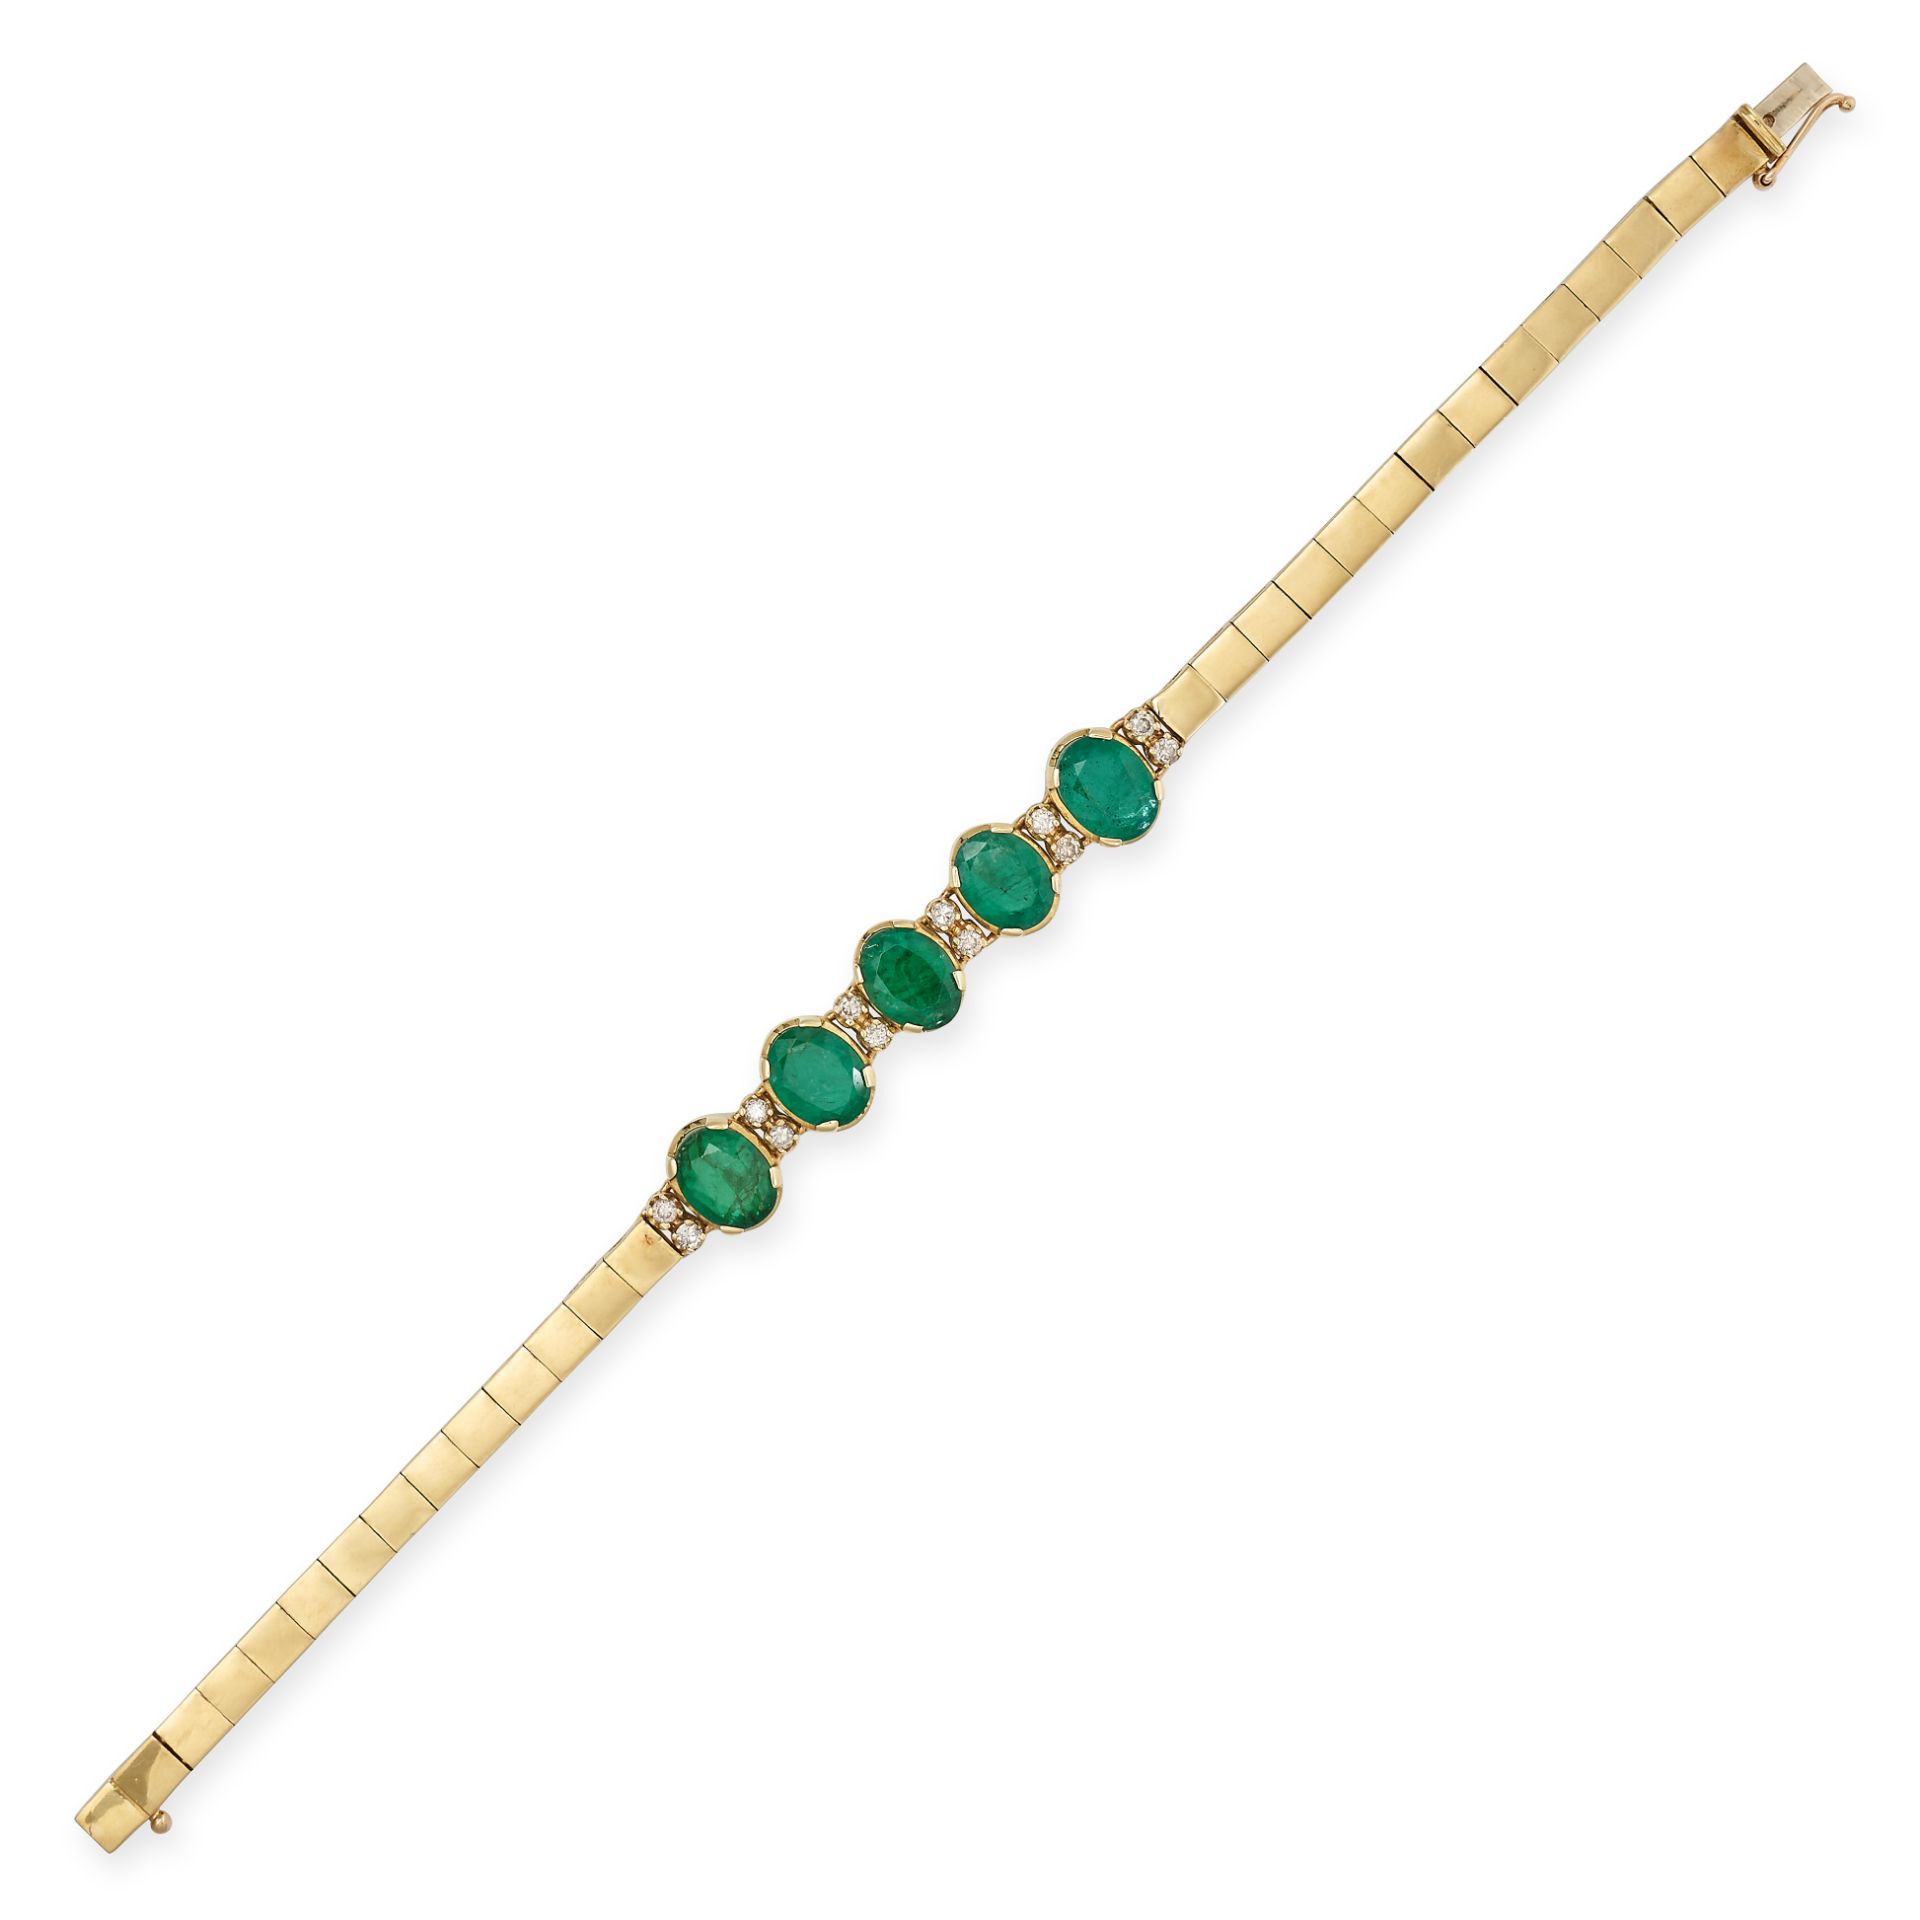 AN EMERALD AND DIAMOND BRACELET in 18ct yellow gold, set with five oval cut emeralds accented by ...